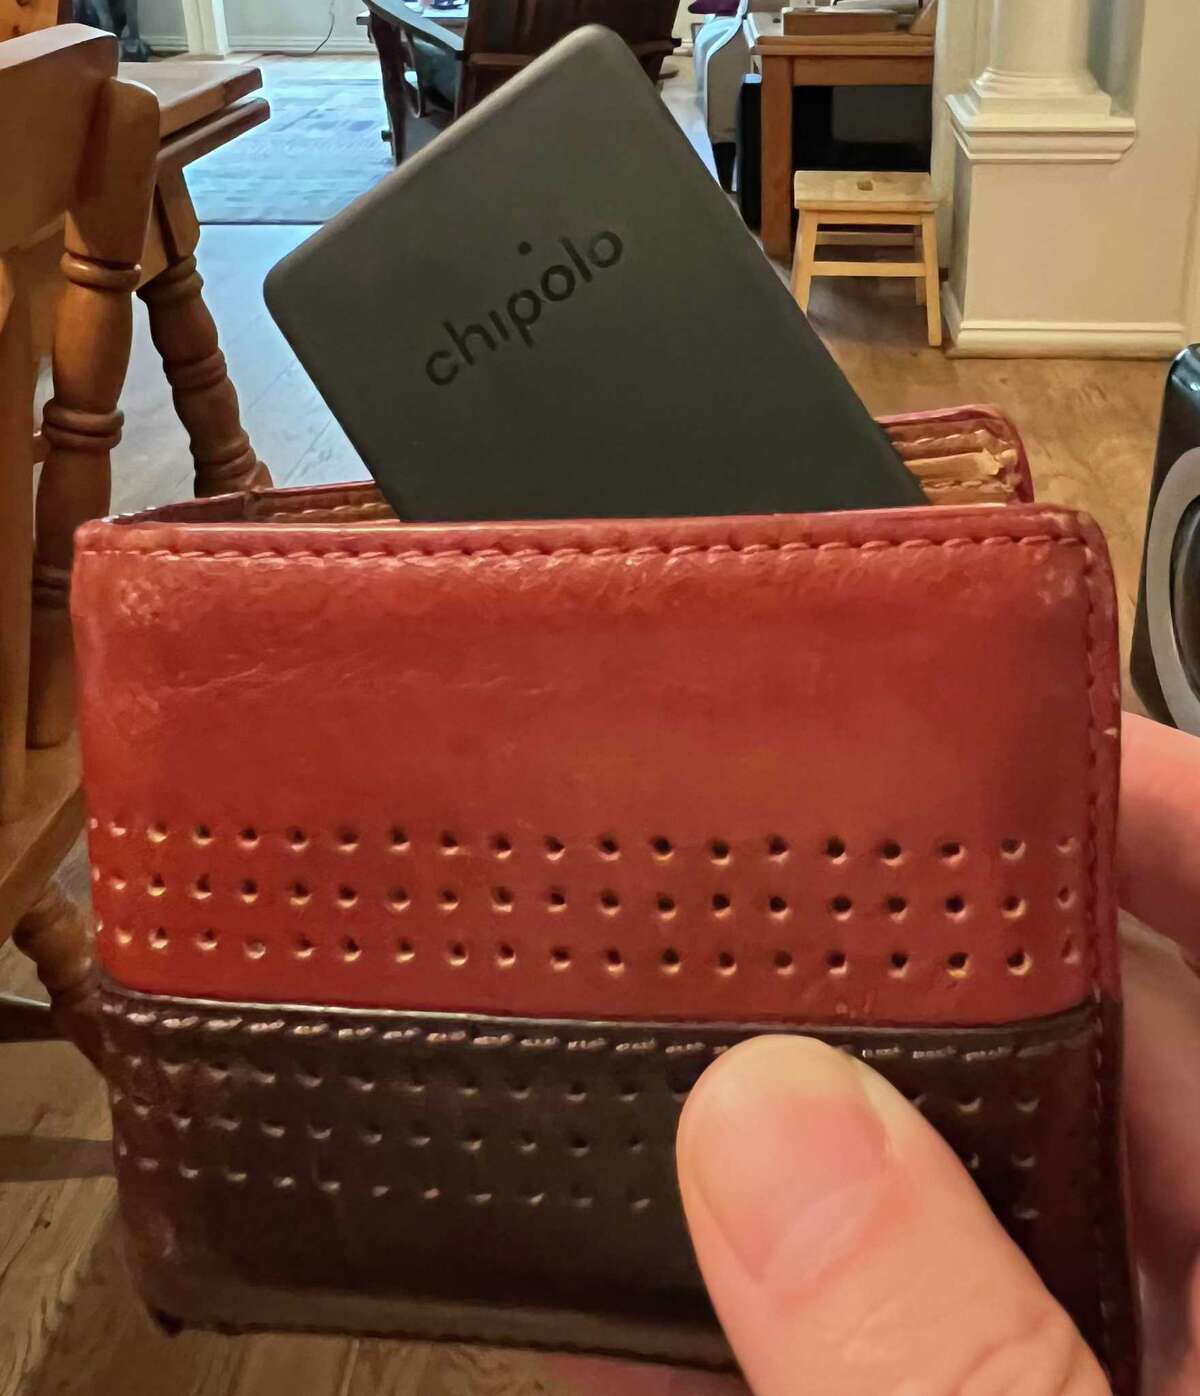 The Chipolo Card Spot fits easily into a wallet’s credit card slot. Once there, it can show you in Apple’s Find My app where it’s located, and even alert you if you’ve left it behind.